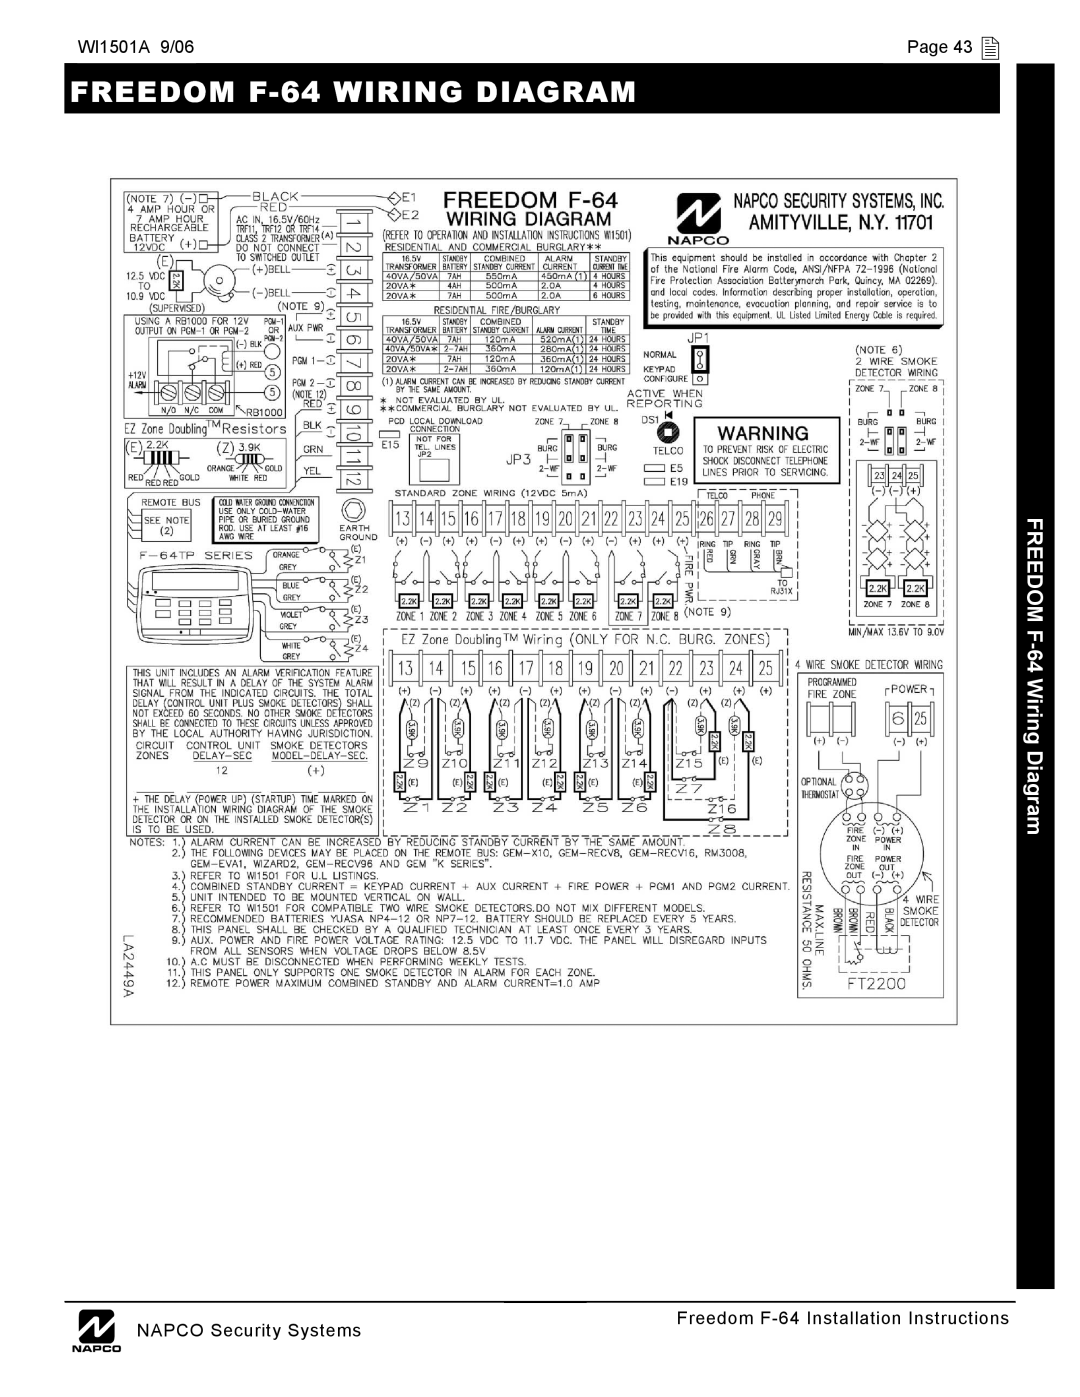 Napco Security Technologies WI1501A installation instructions FREEDOM F-64WIRING DIAGRAM, FREEDOM F-64Wiring Diagram 